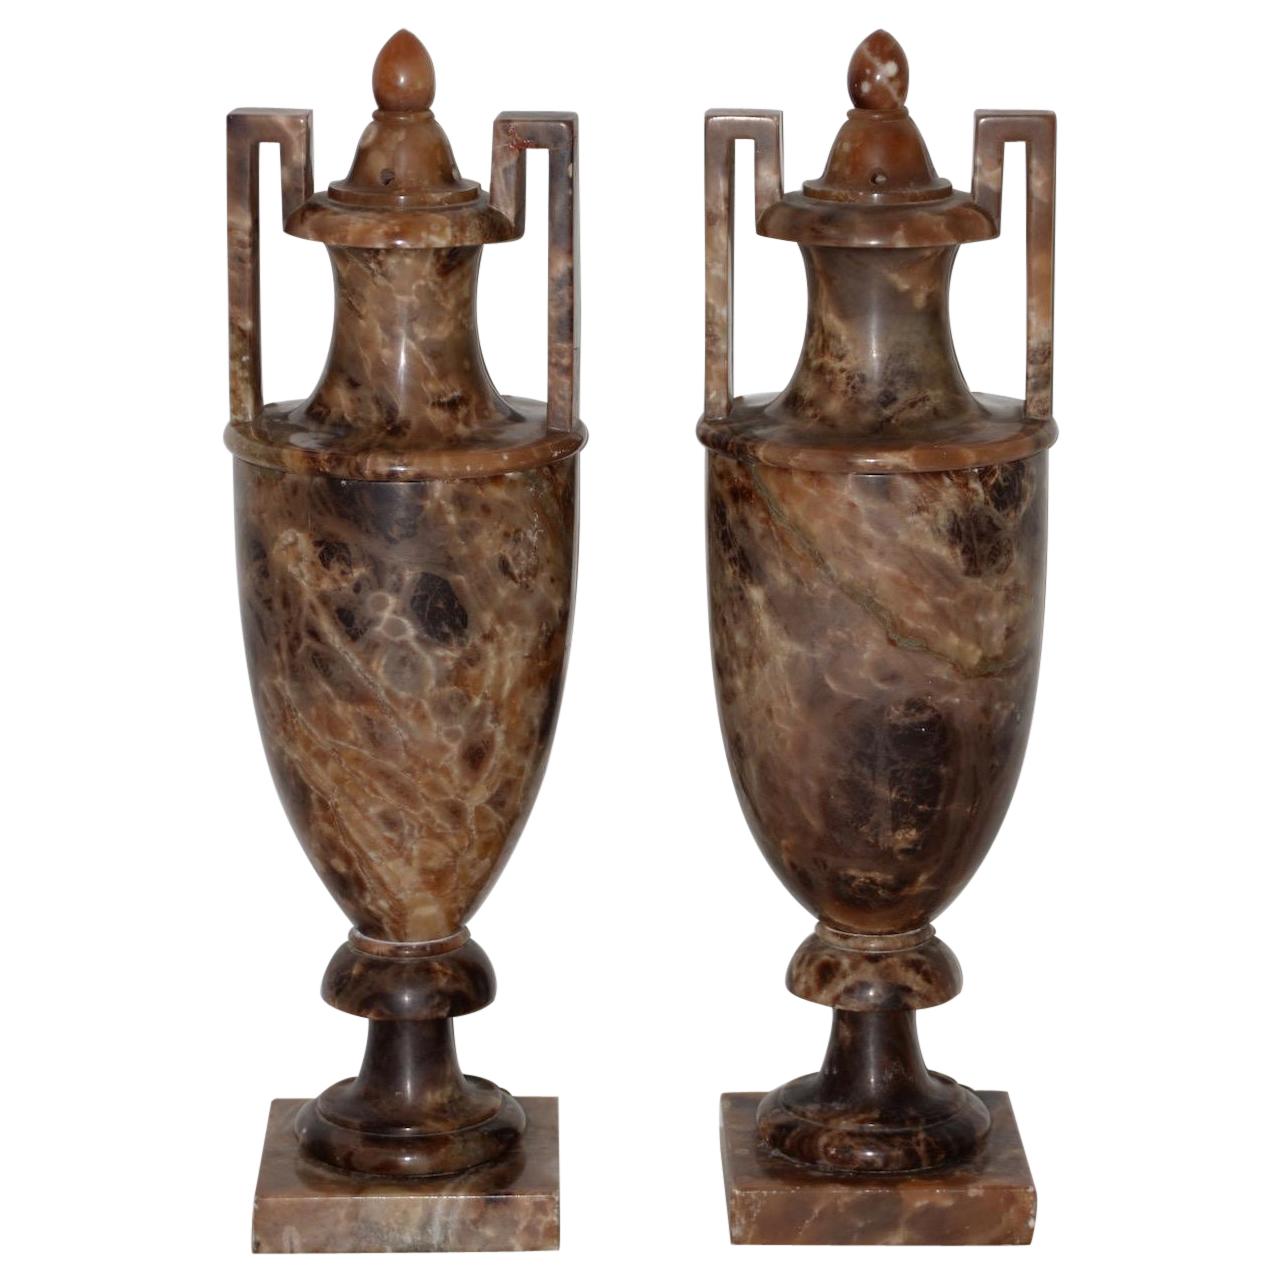 Pair of Neoclassical Alabaster Urns with Lids, circa 1910